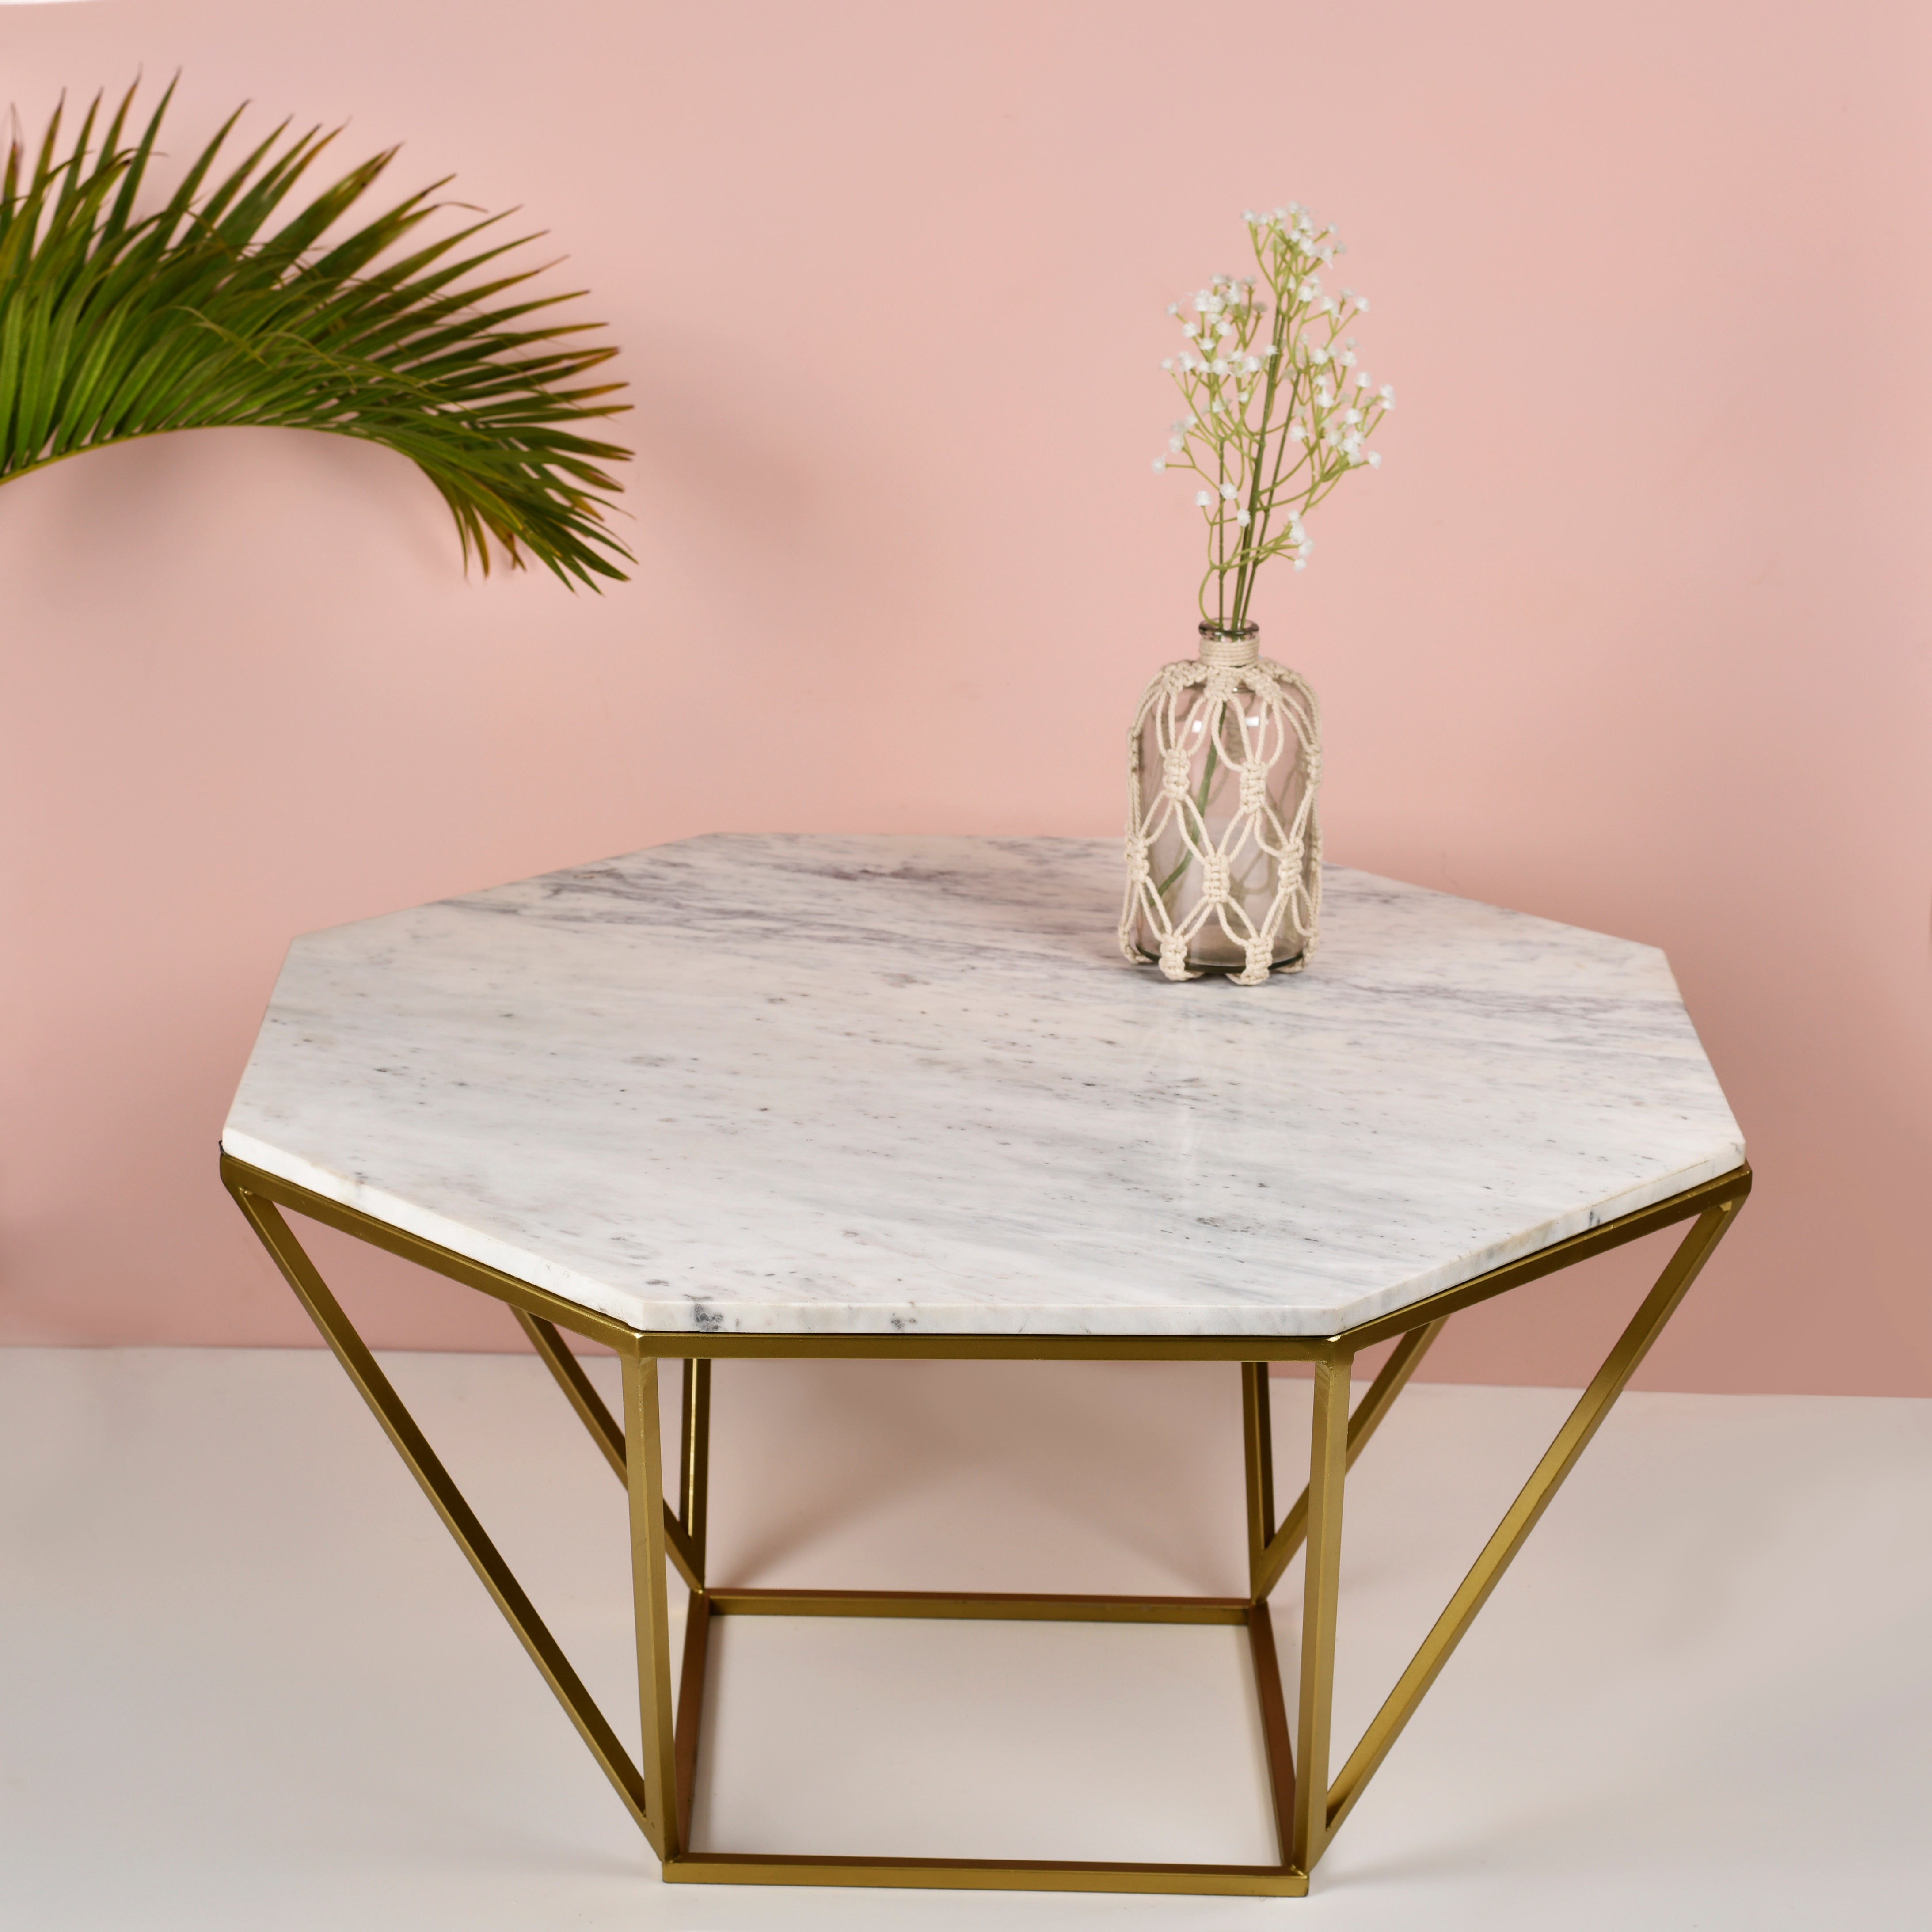 Signum Marble Hexagon Shaped Coffee Table 31 inches